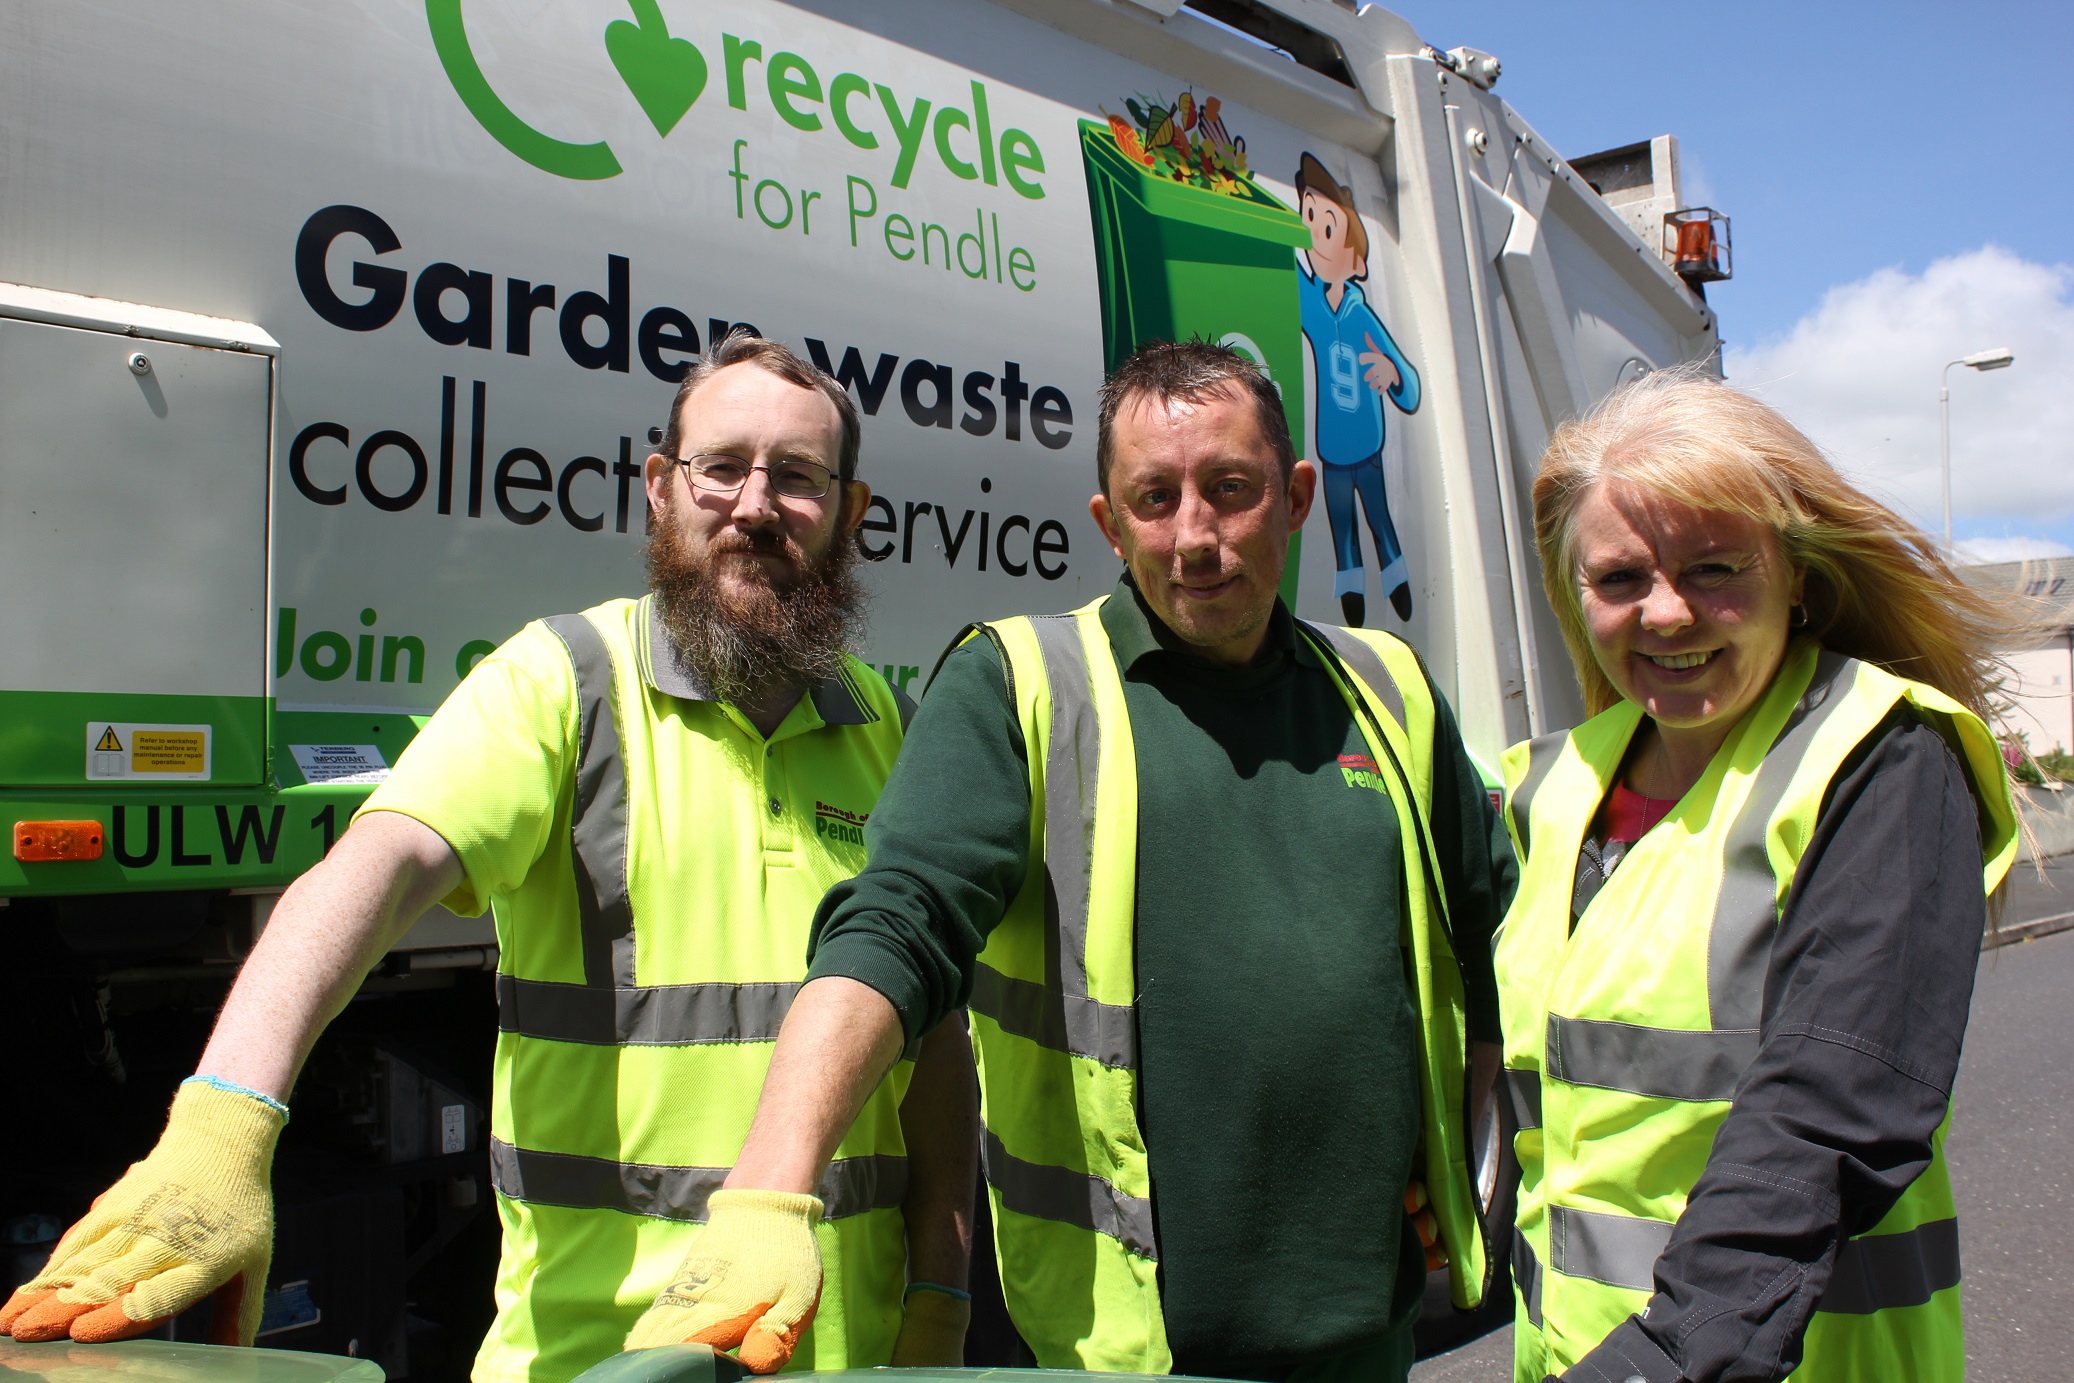 Garden waste collections spring into action in Pendle!